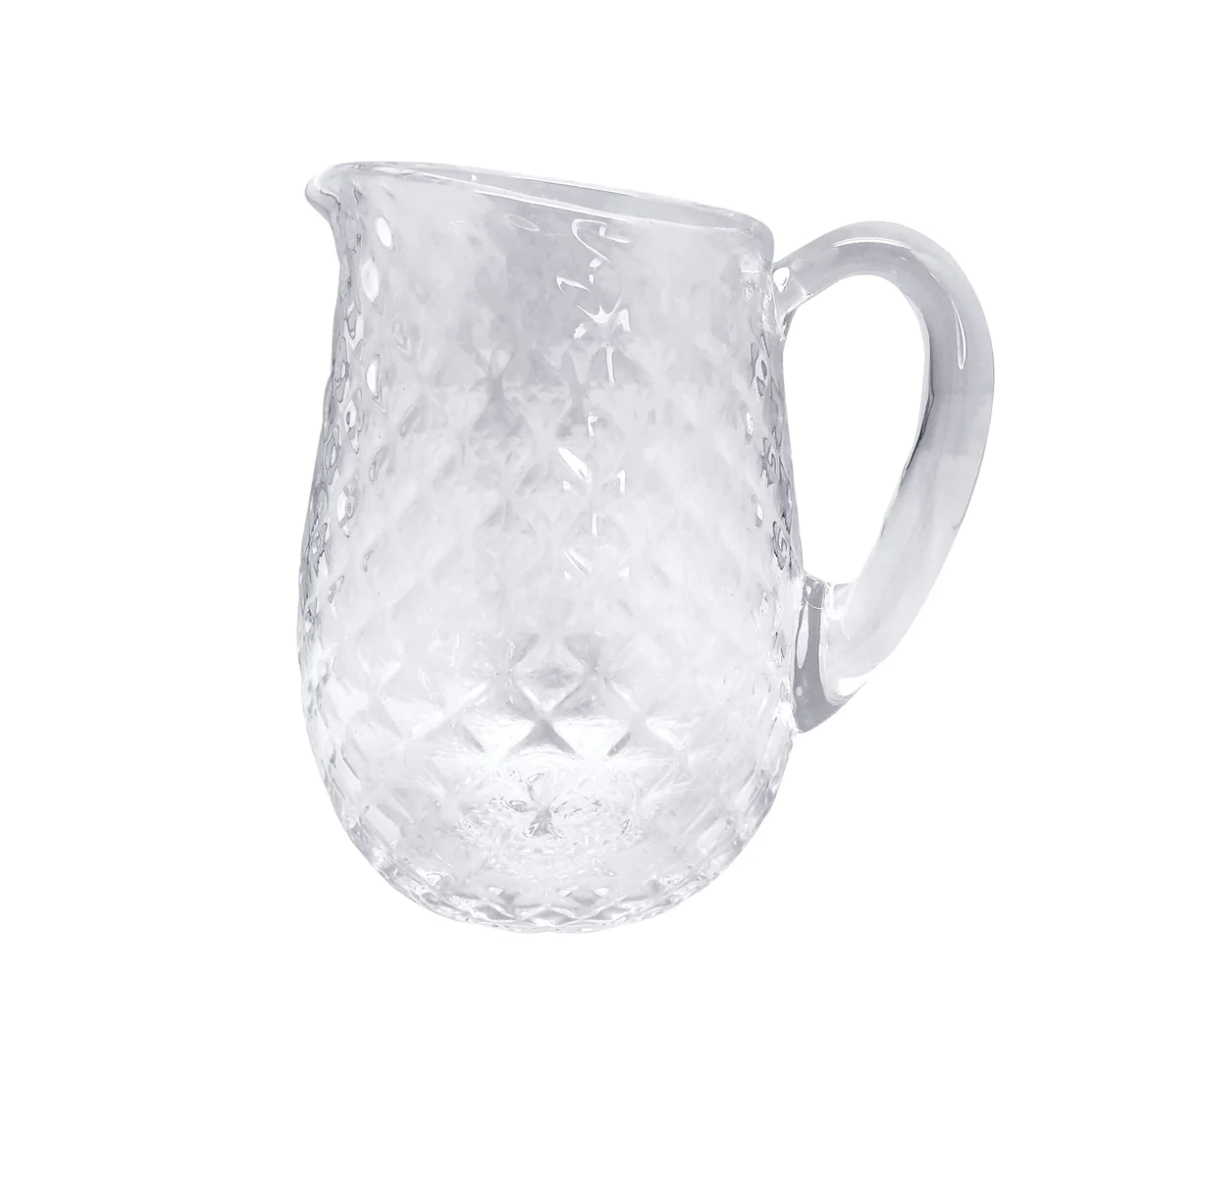 MARIPOSA Clear Pineapple Textured Pitcher